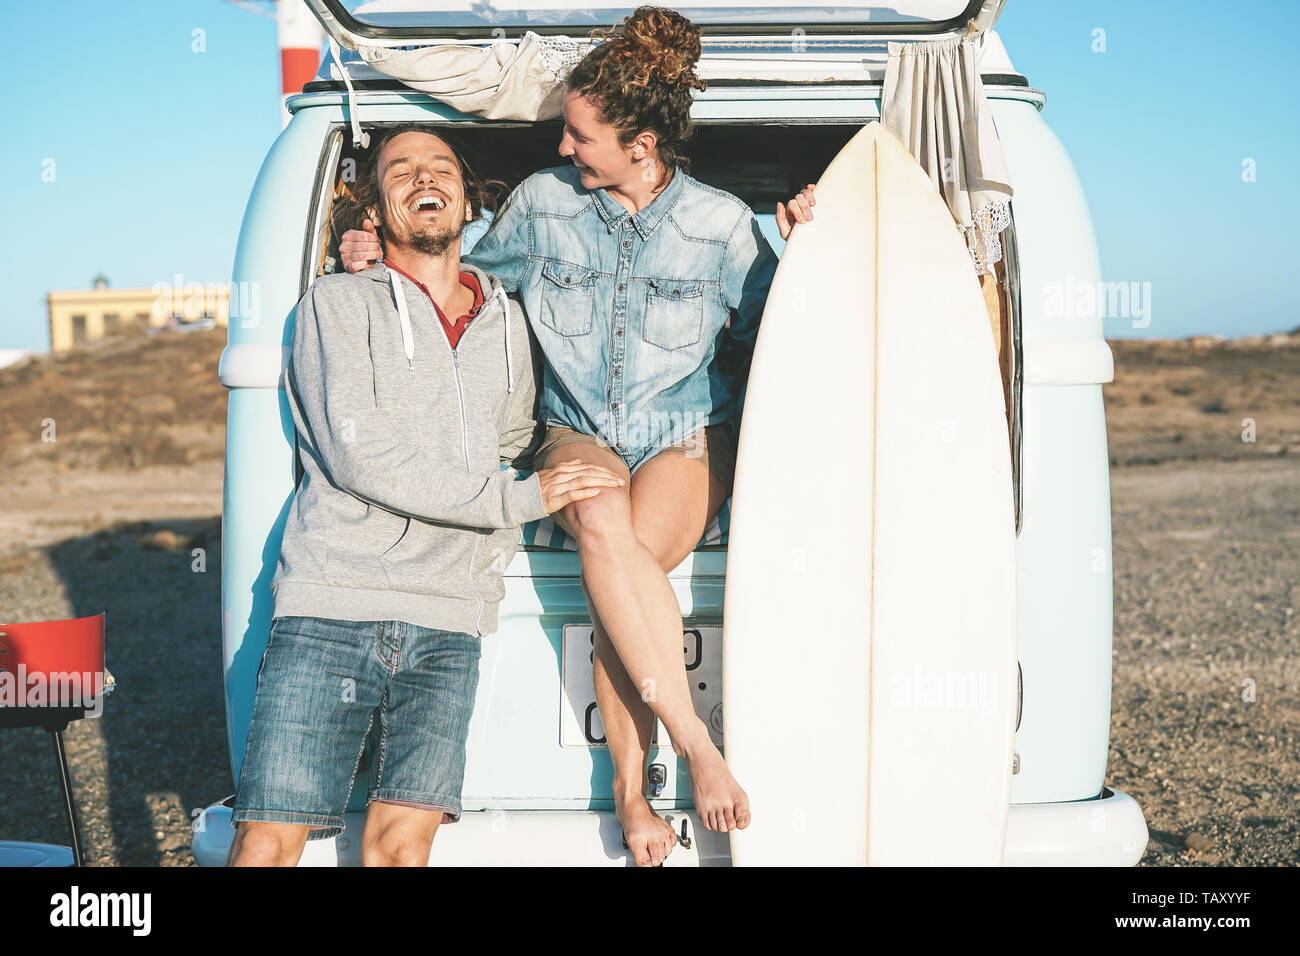 Happy surfers couple standing behind on vintage camper mini van - Young people adventuring on road trip with a minivan transport Stock Photo